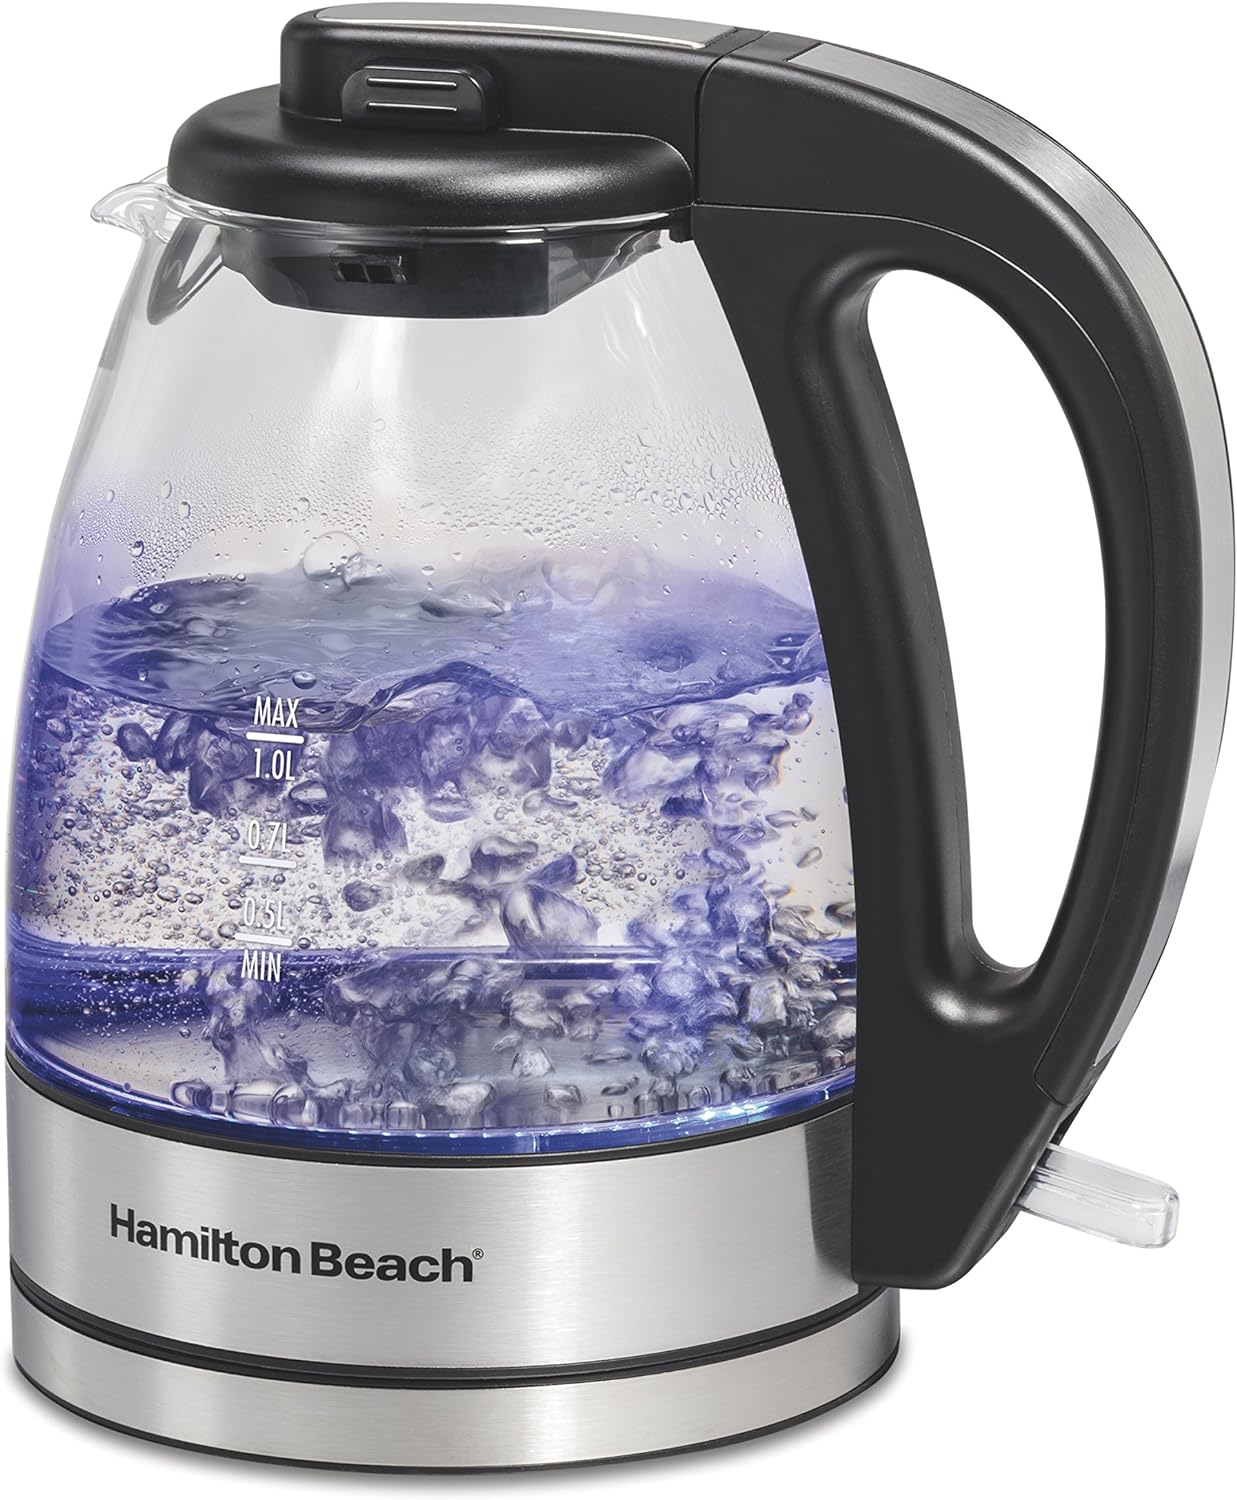 Hamilton Beach Glass Electric Tea Kettle (40930) and Coffee Grinder for Beans and Spices